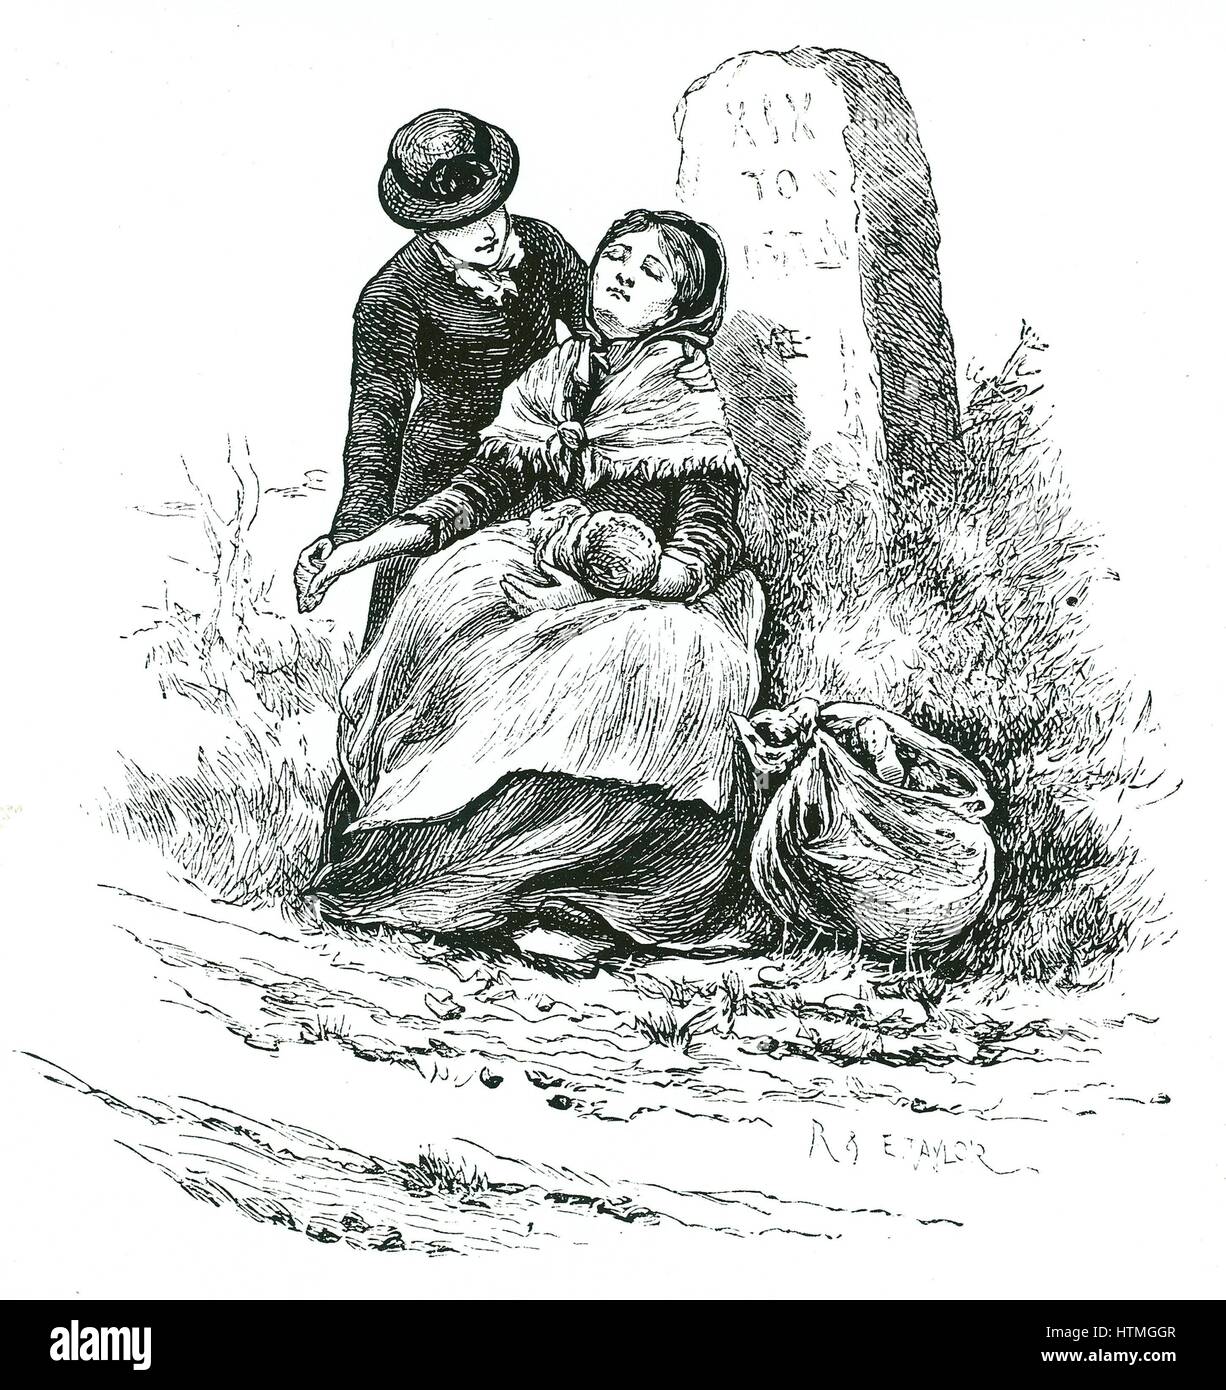 An destitute, unmarried mother found exhausted on her way to the Workhouse with her baby. Scene reminiscent of a Thomas Hardy novel but one not uncommon in rural areas throughout the country. Illustration by Mary Ellen Edwards c1881. Stock Photo